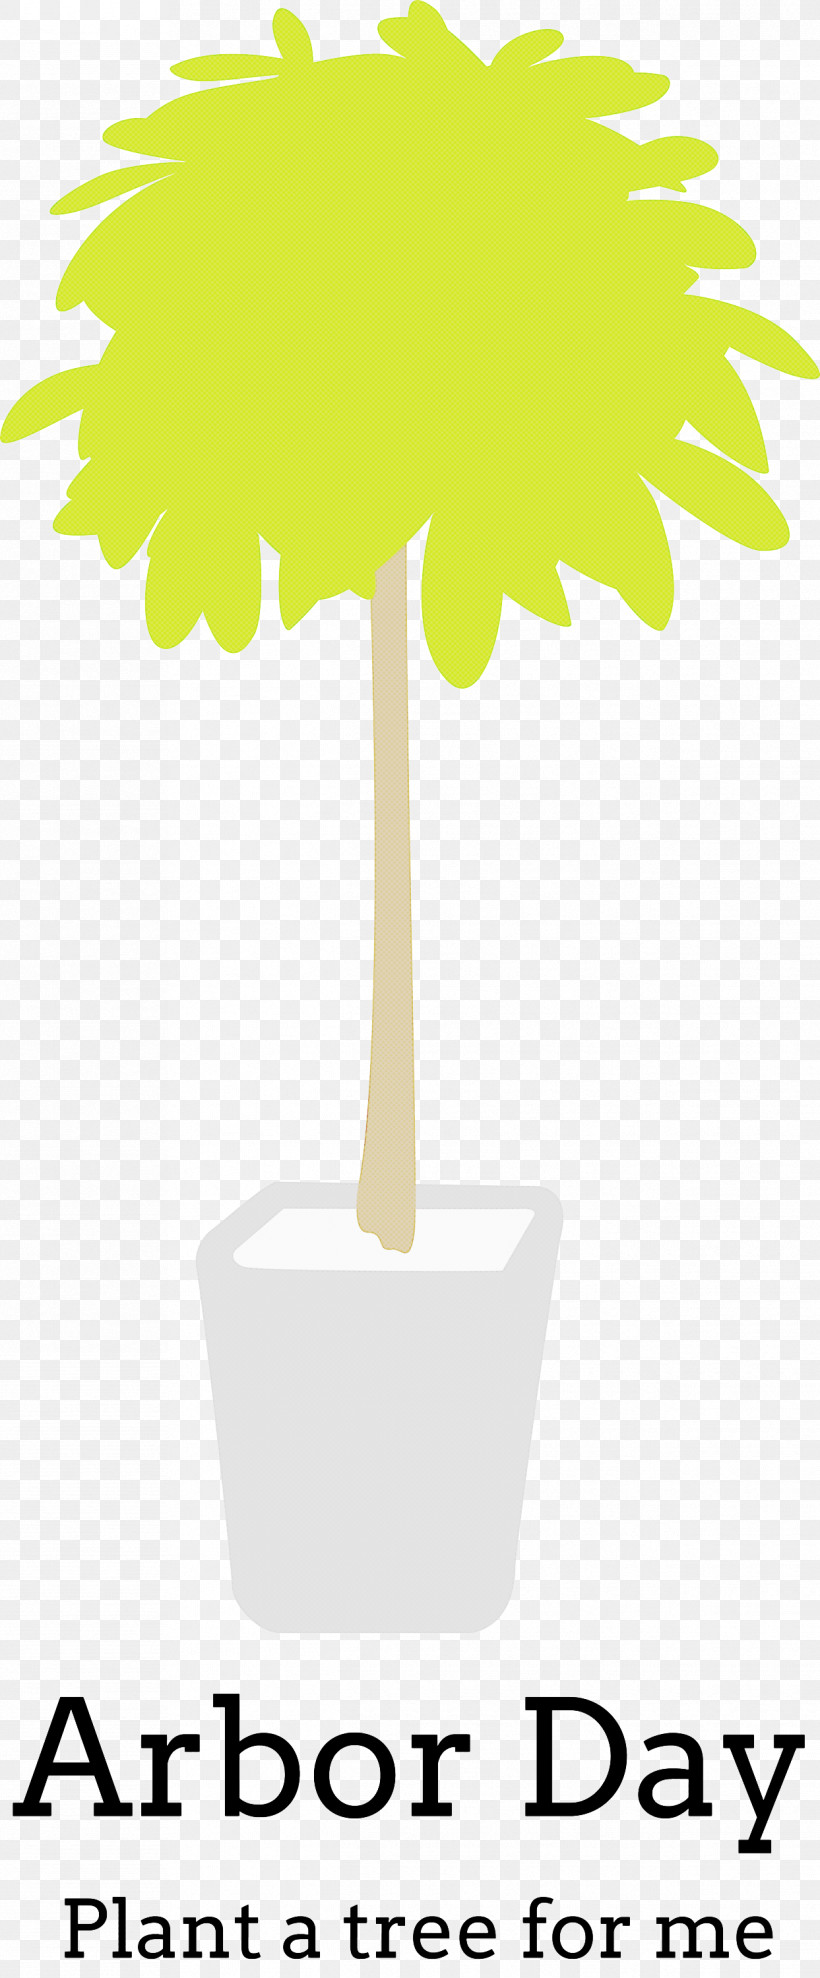 Arbor Day Green Earth Earth Day, PNG, 1243x2999px, Arbor Day, Arecales, Earth Day, Flowerpot, Green Earth Download Free